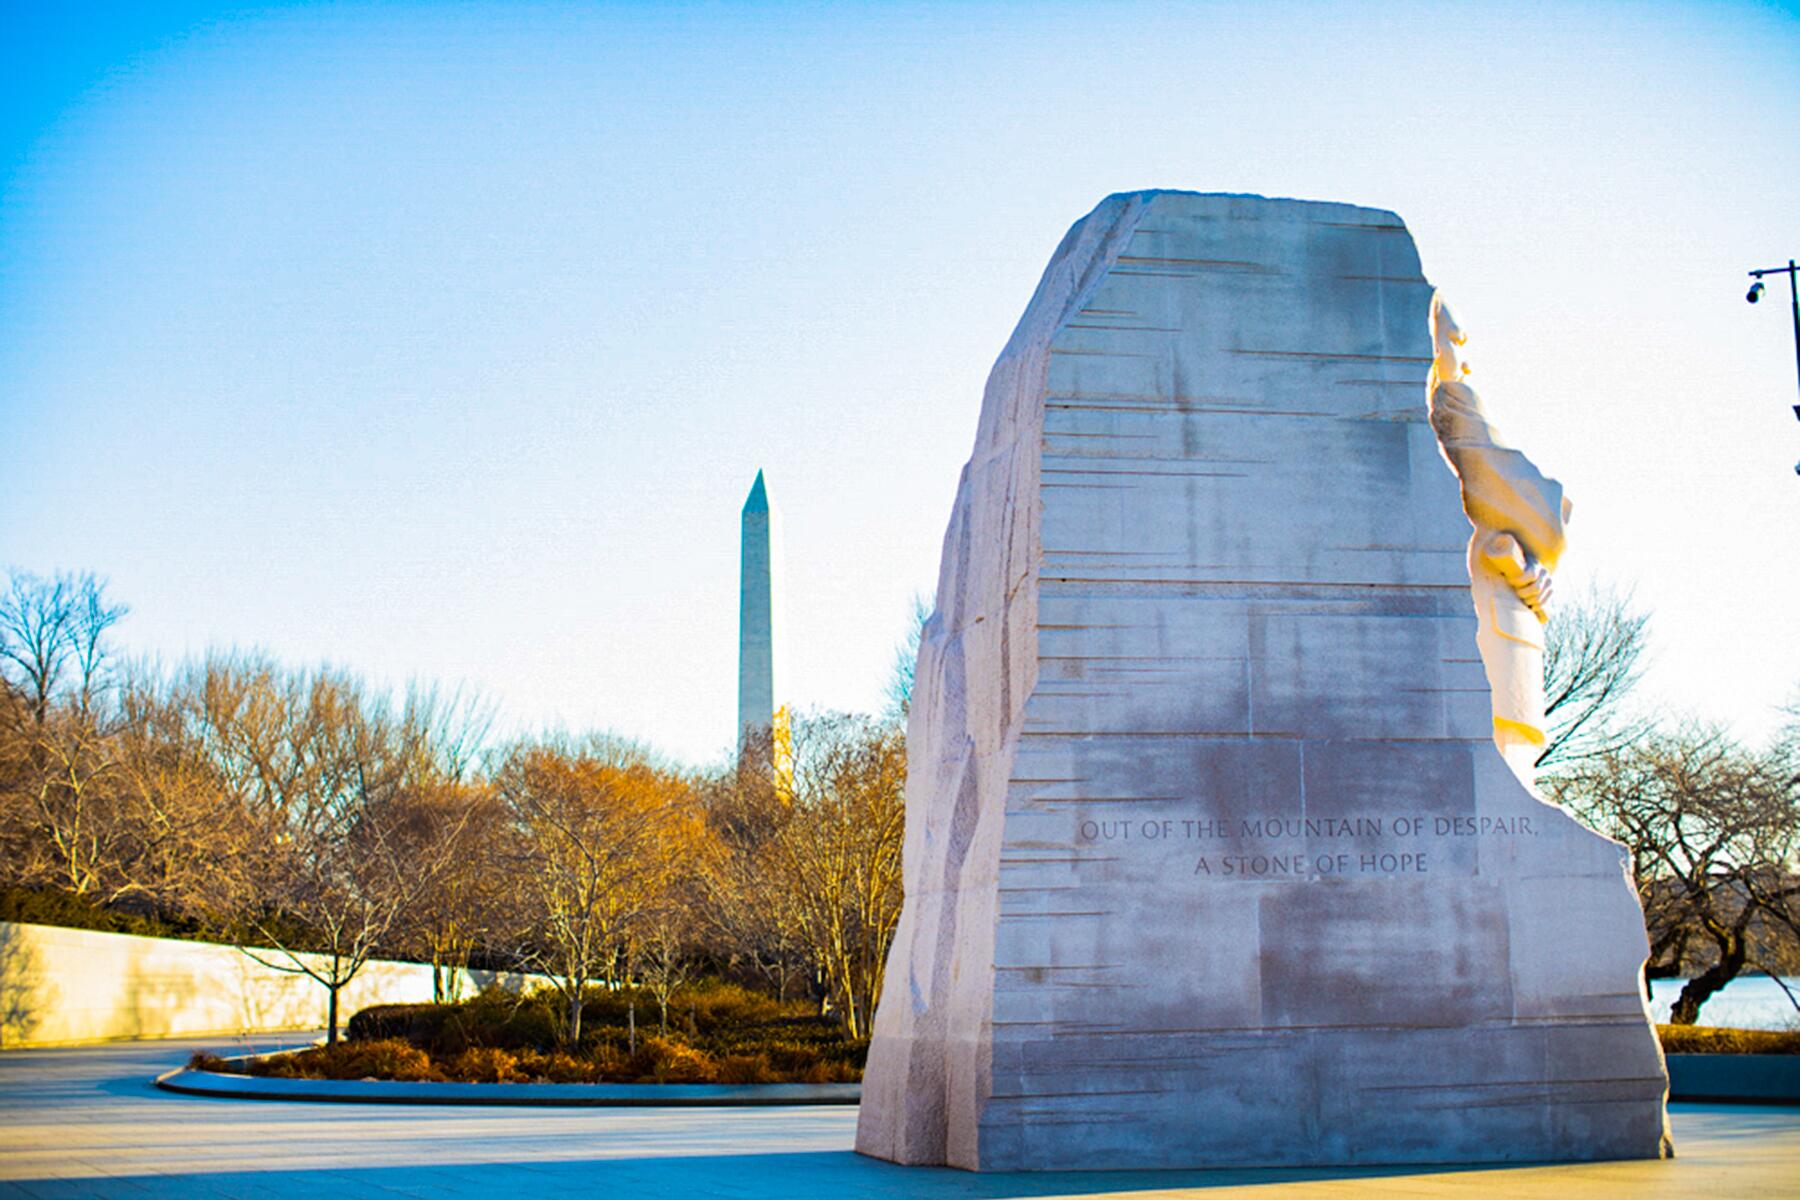 <a href='https://www.fodors.com/world/north-america/usa/washington-dc/experiences/news/photos/places-to-find-black-history-in-washington-dc#'>From &quot;11 Places to Connect With Washington, D.C.’s Rich Black History: Martin Luther King, Jr. Memorial&quot;</a>